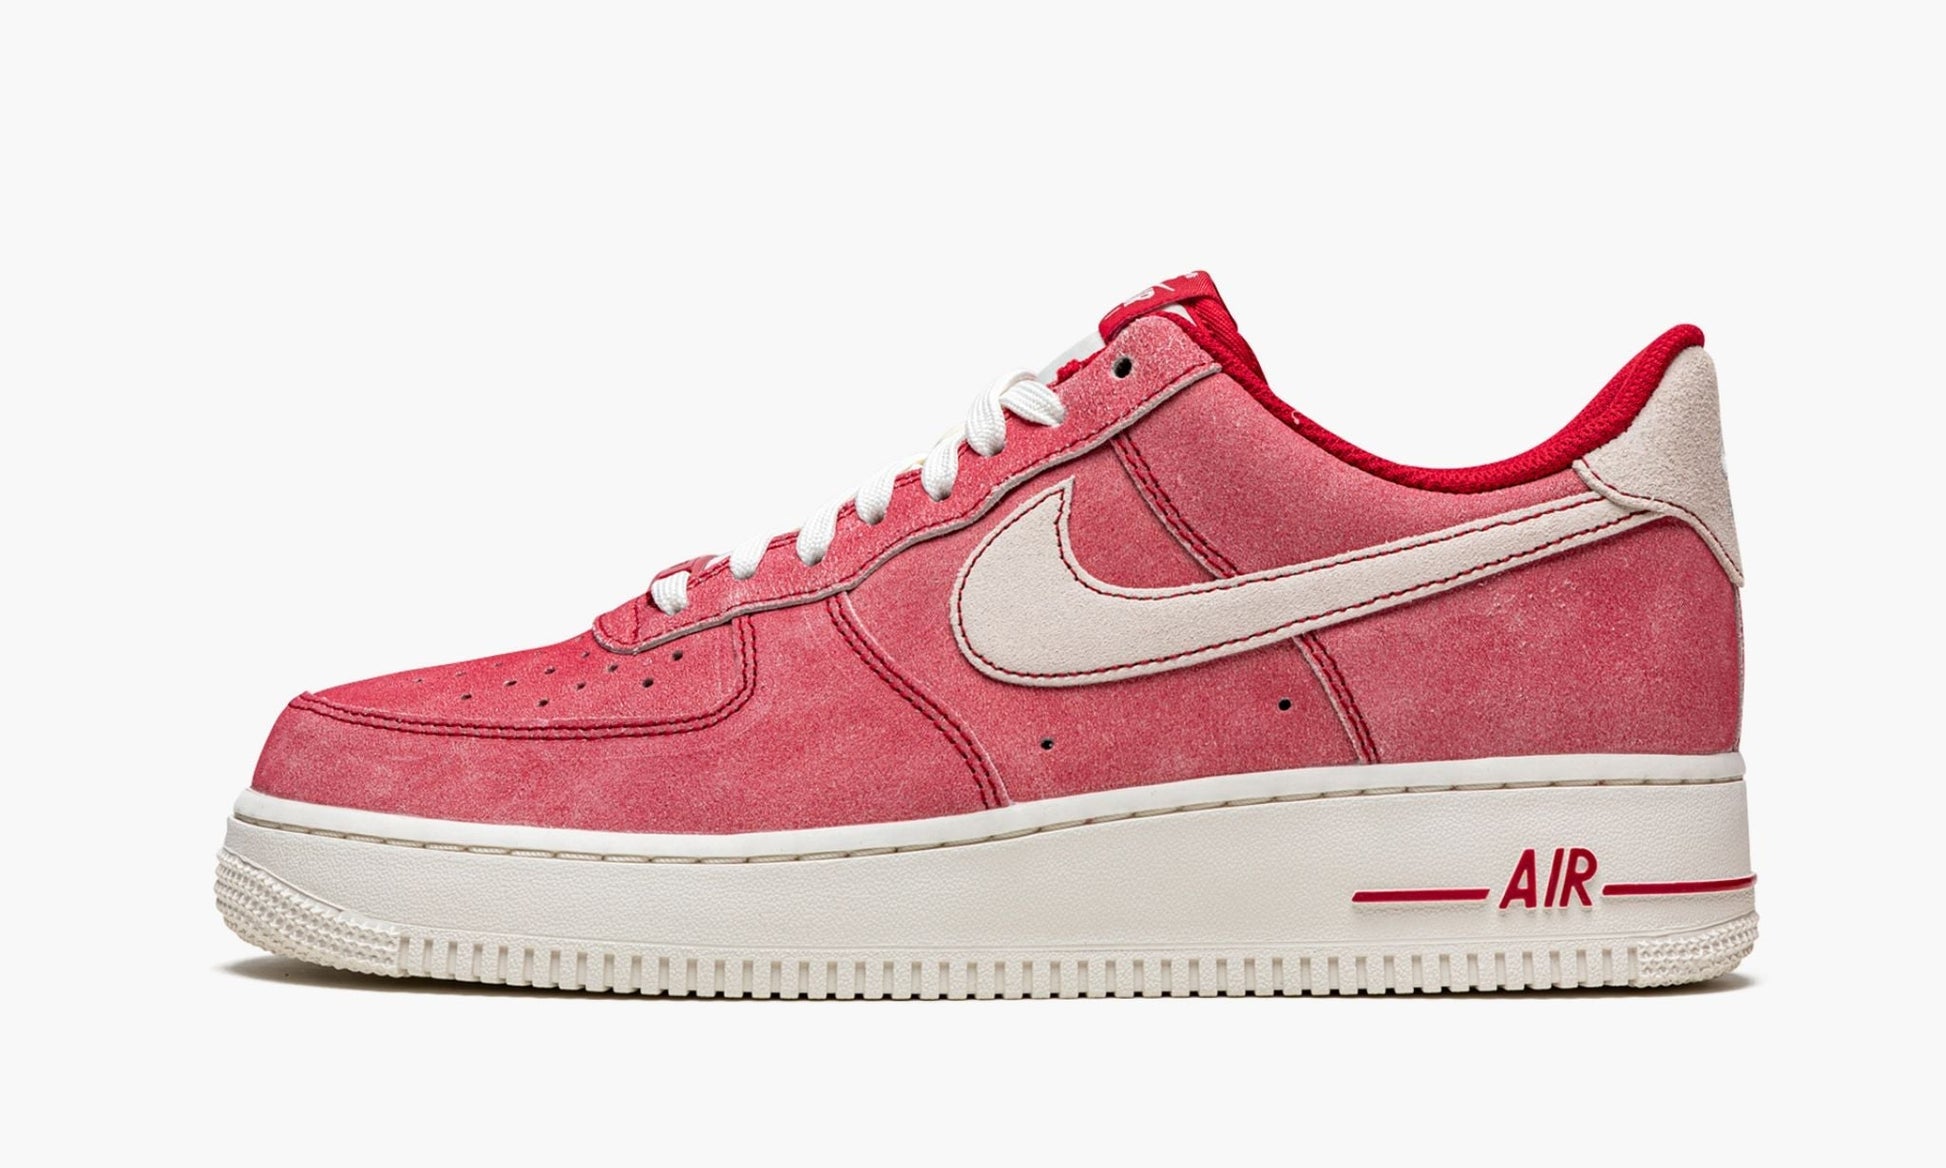 Air Force 1 Low '07 LV8 "Dusty Red"